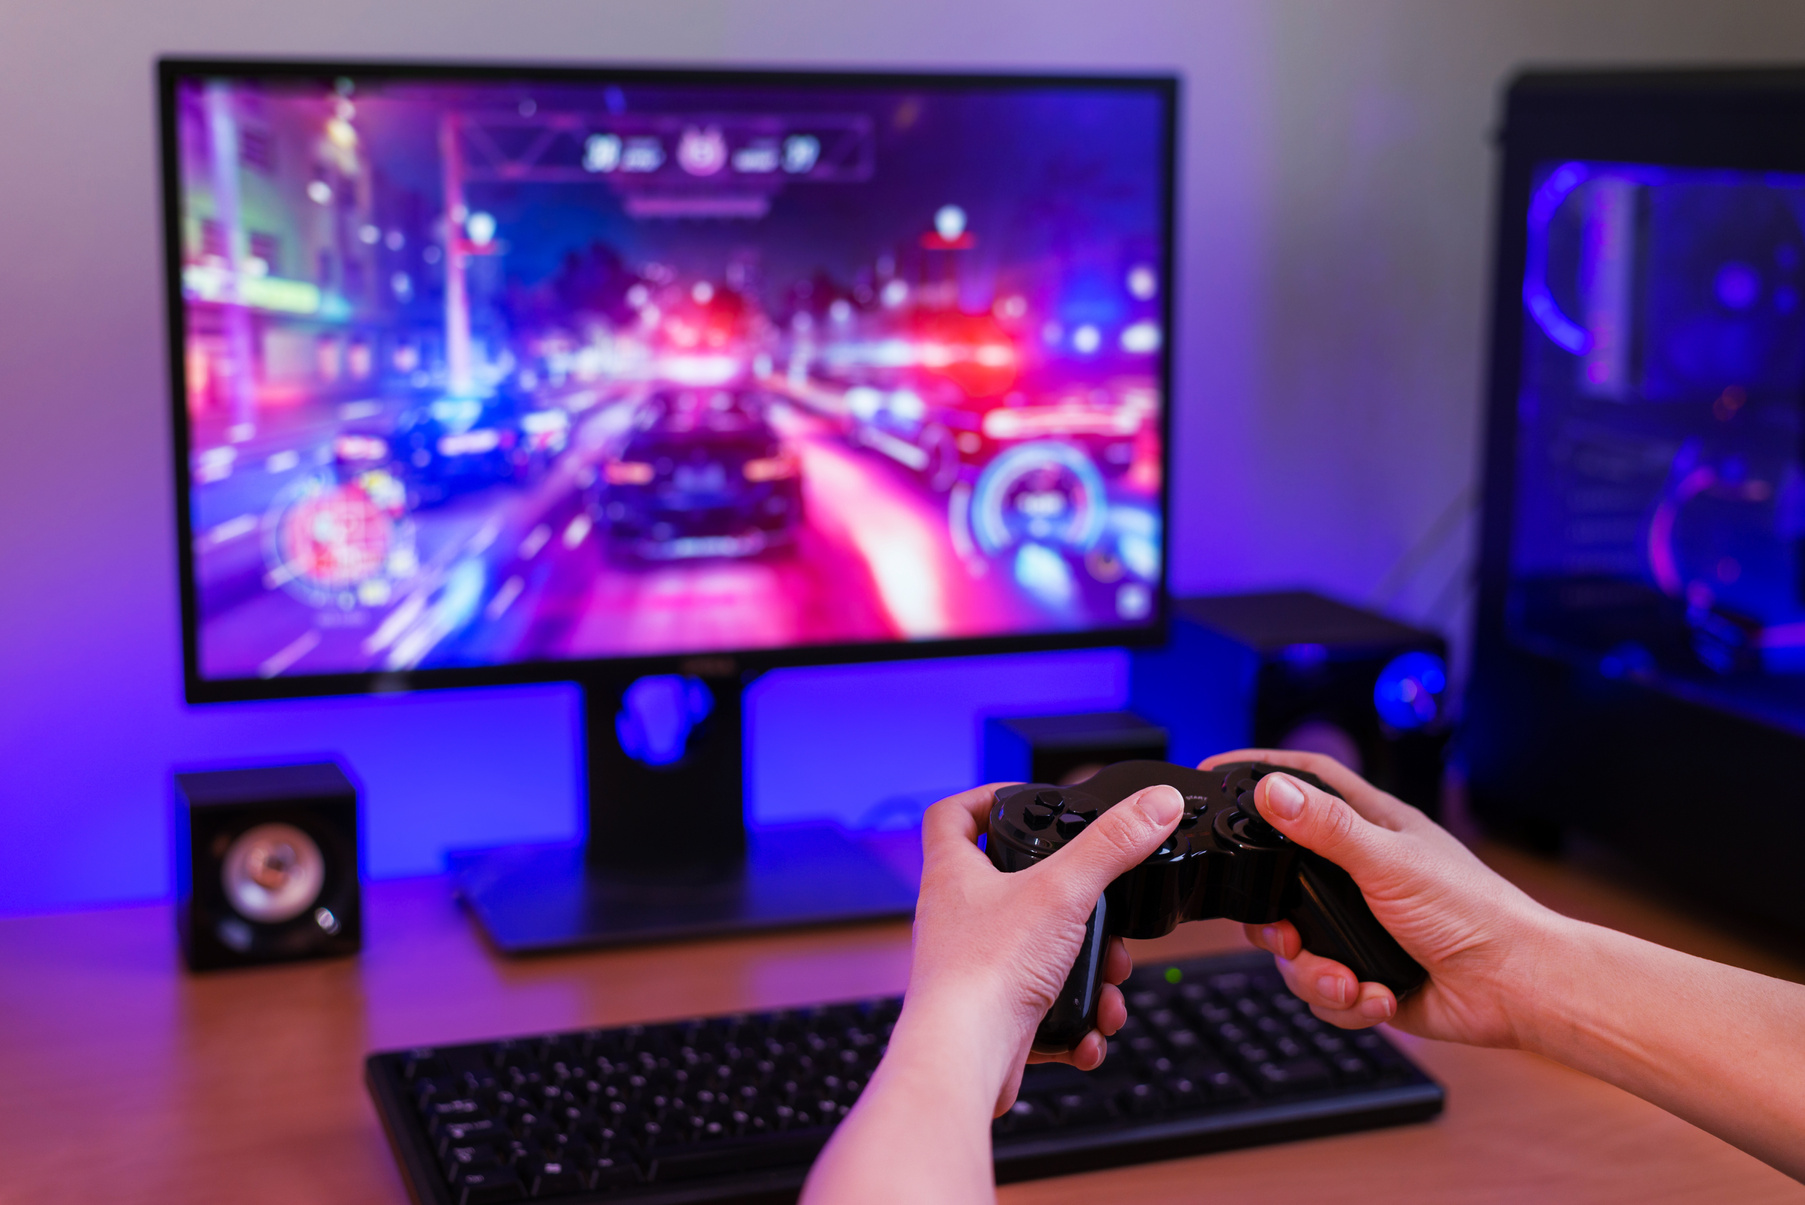 Playing racing games on computer concept. Hand holds the joystick. In the background is a gaming computer with RGB light.